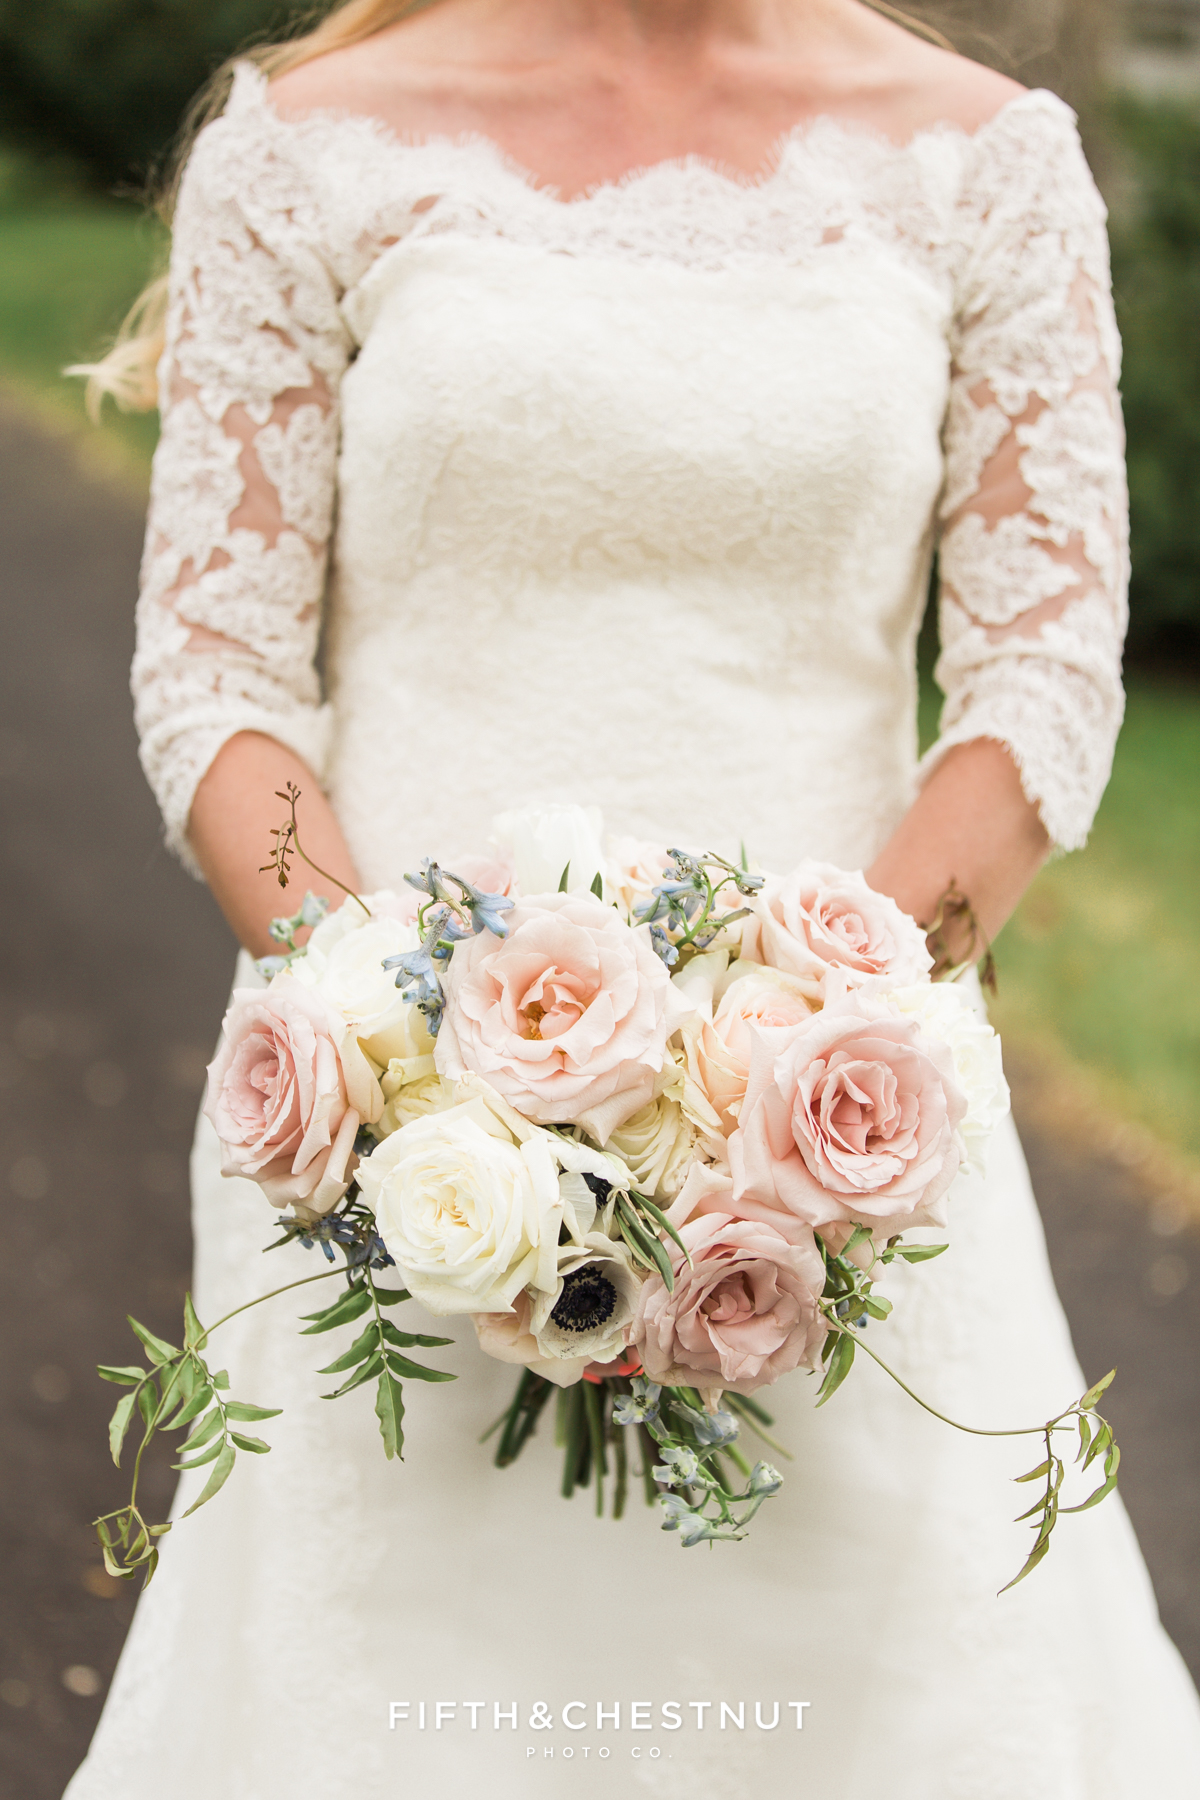 Bride in a lace wedding dress showing off her country french bouquet for a dusty blue wedding styled shoot